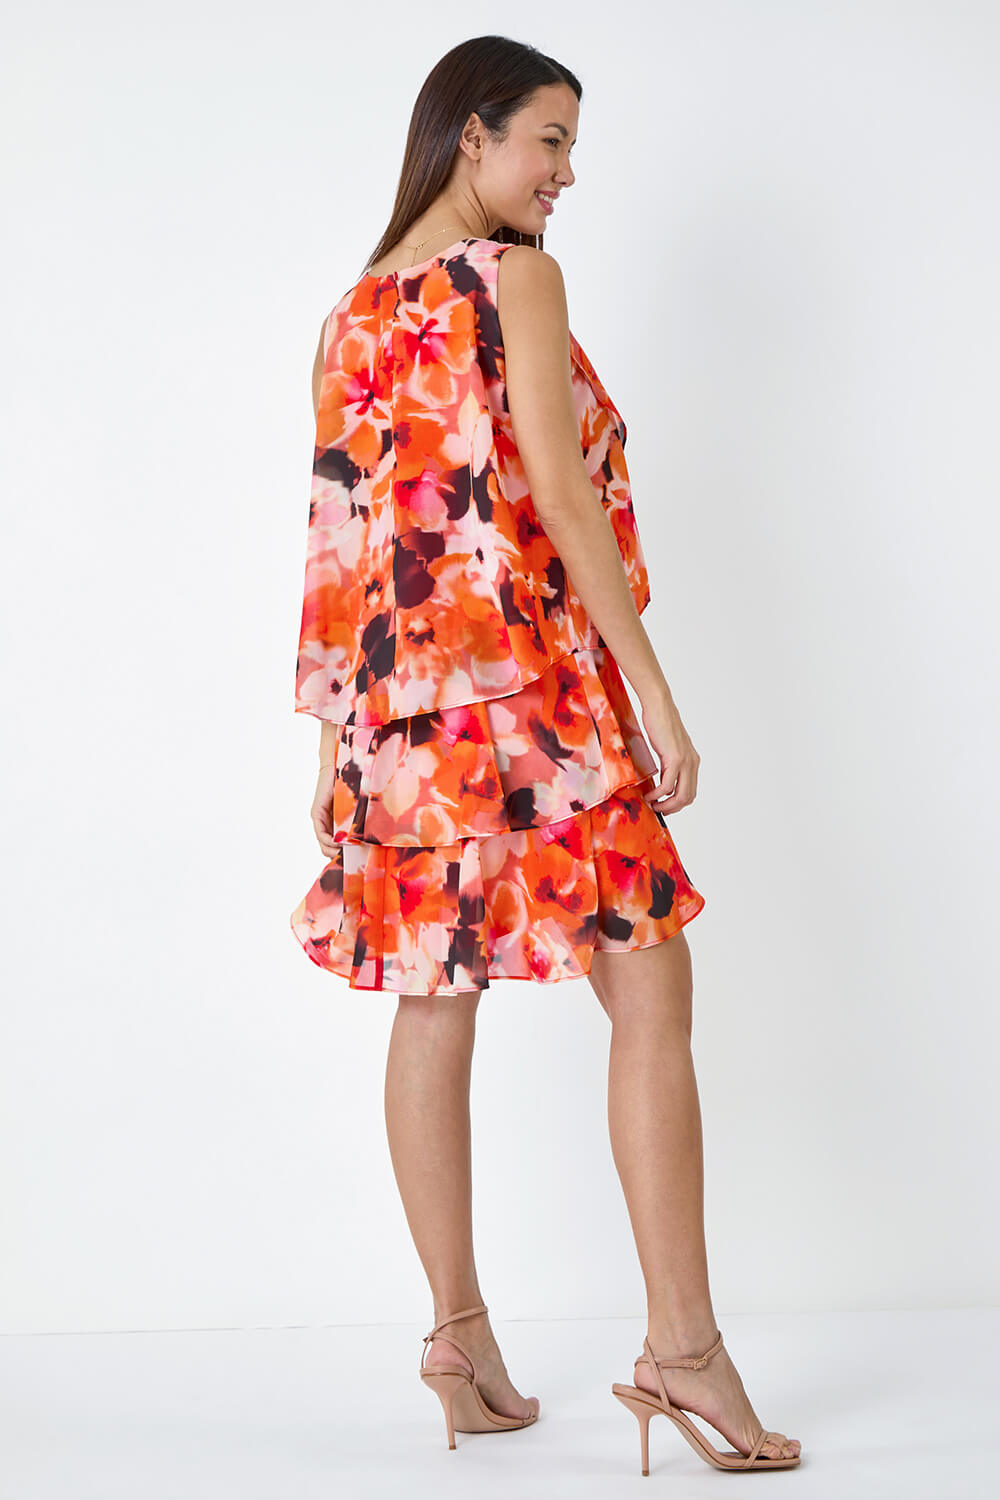 ORANGE Floral Print Tiered Layer Dress, Image 3 of 5